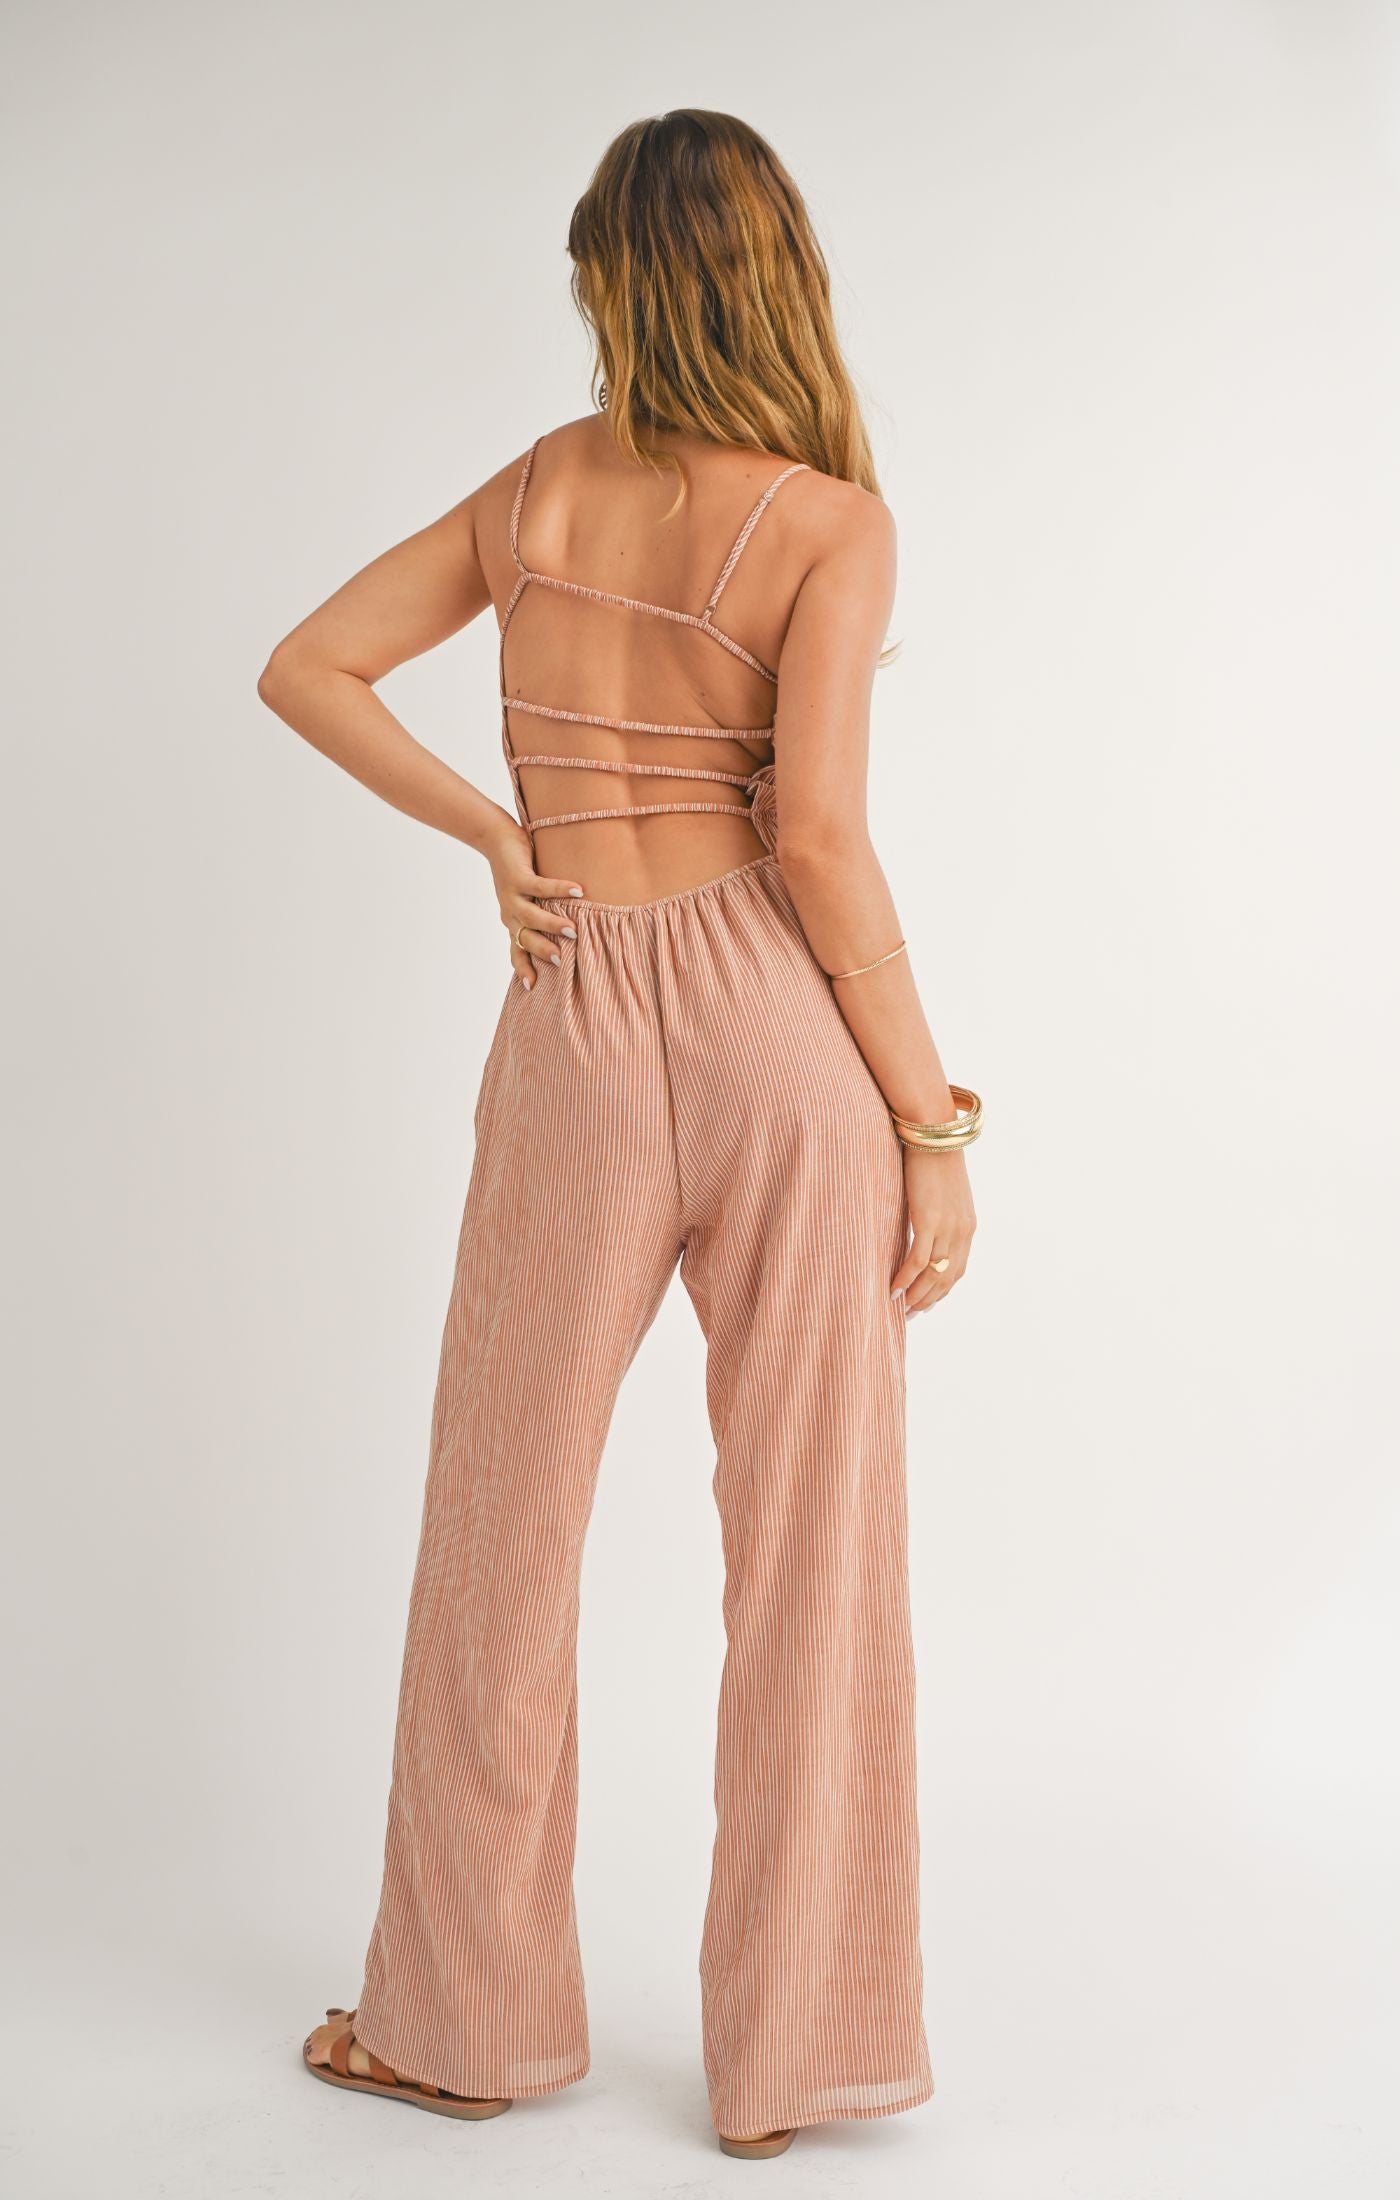 Sage The Label, Canyon Land Open Back Jumpsuit in Rust White - Boutique Dandelion